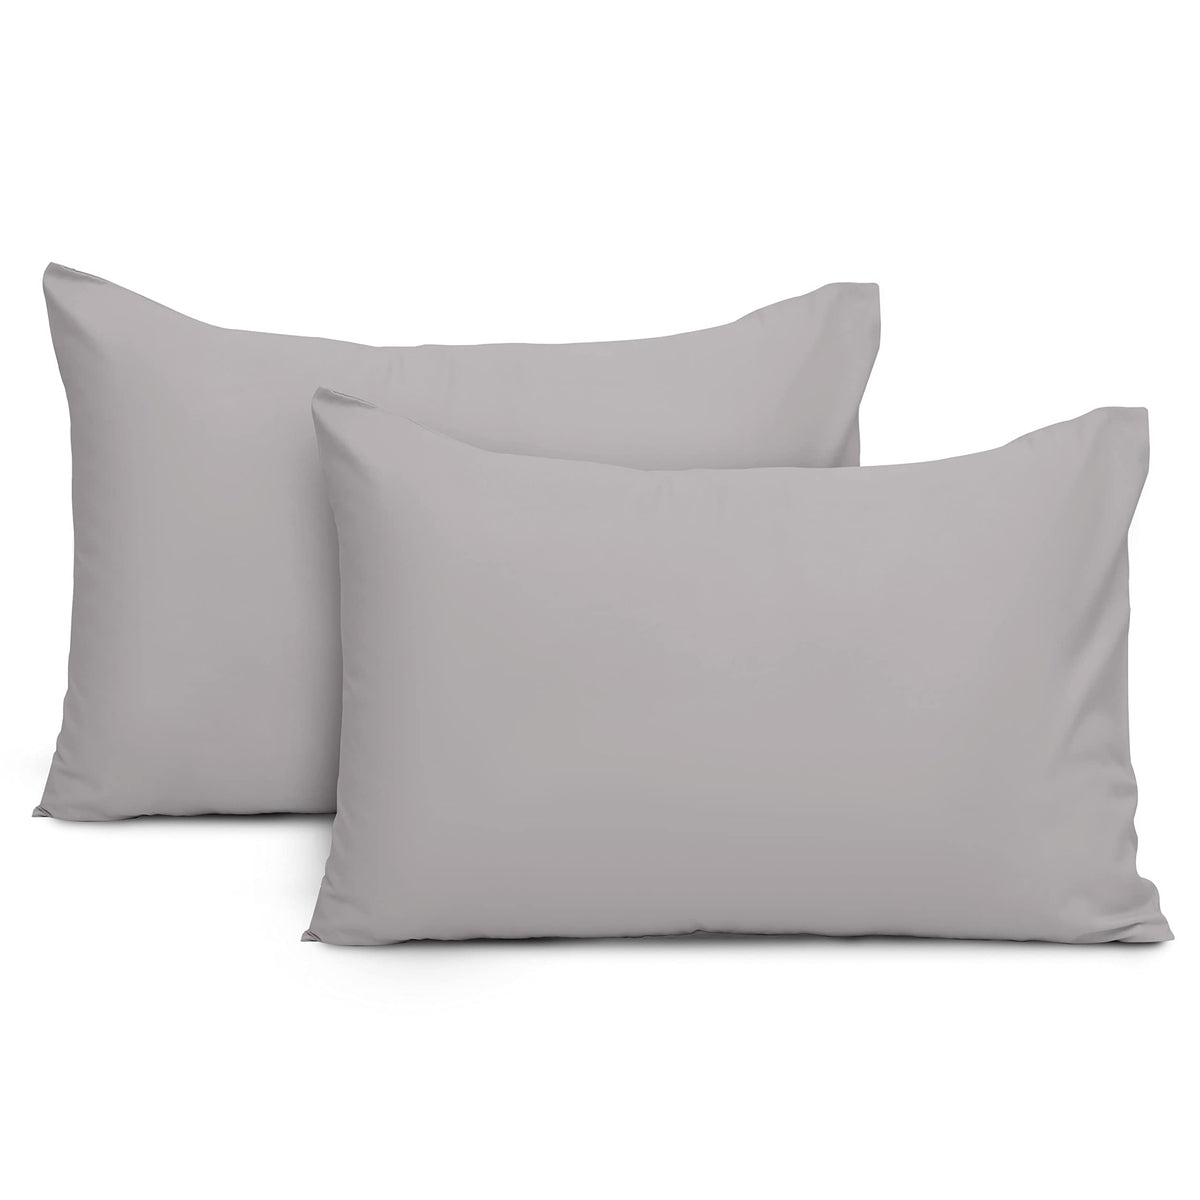 Imperial Rooms Pillow Cases 2 Pack Brushed Microfibre Pillow Covers (Grey, Pillow Cases 2 Pack)